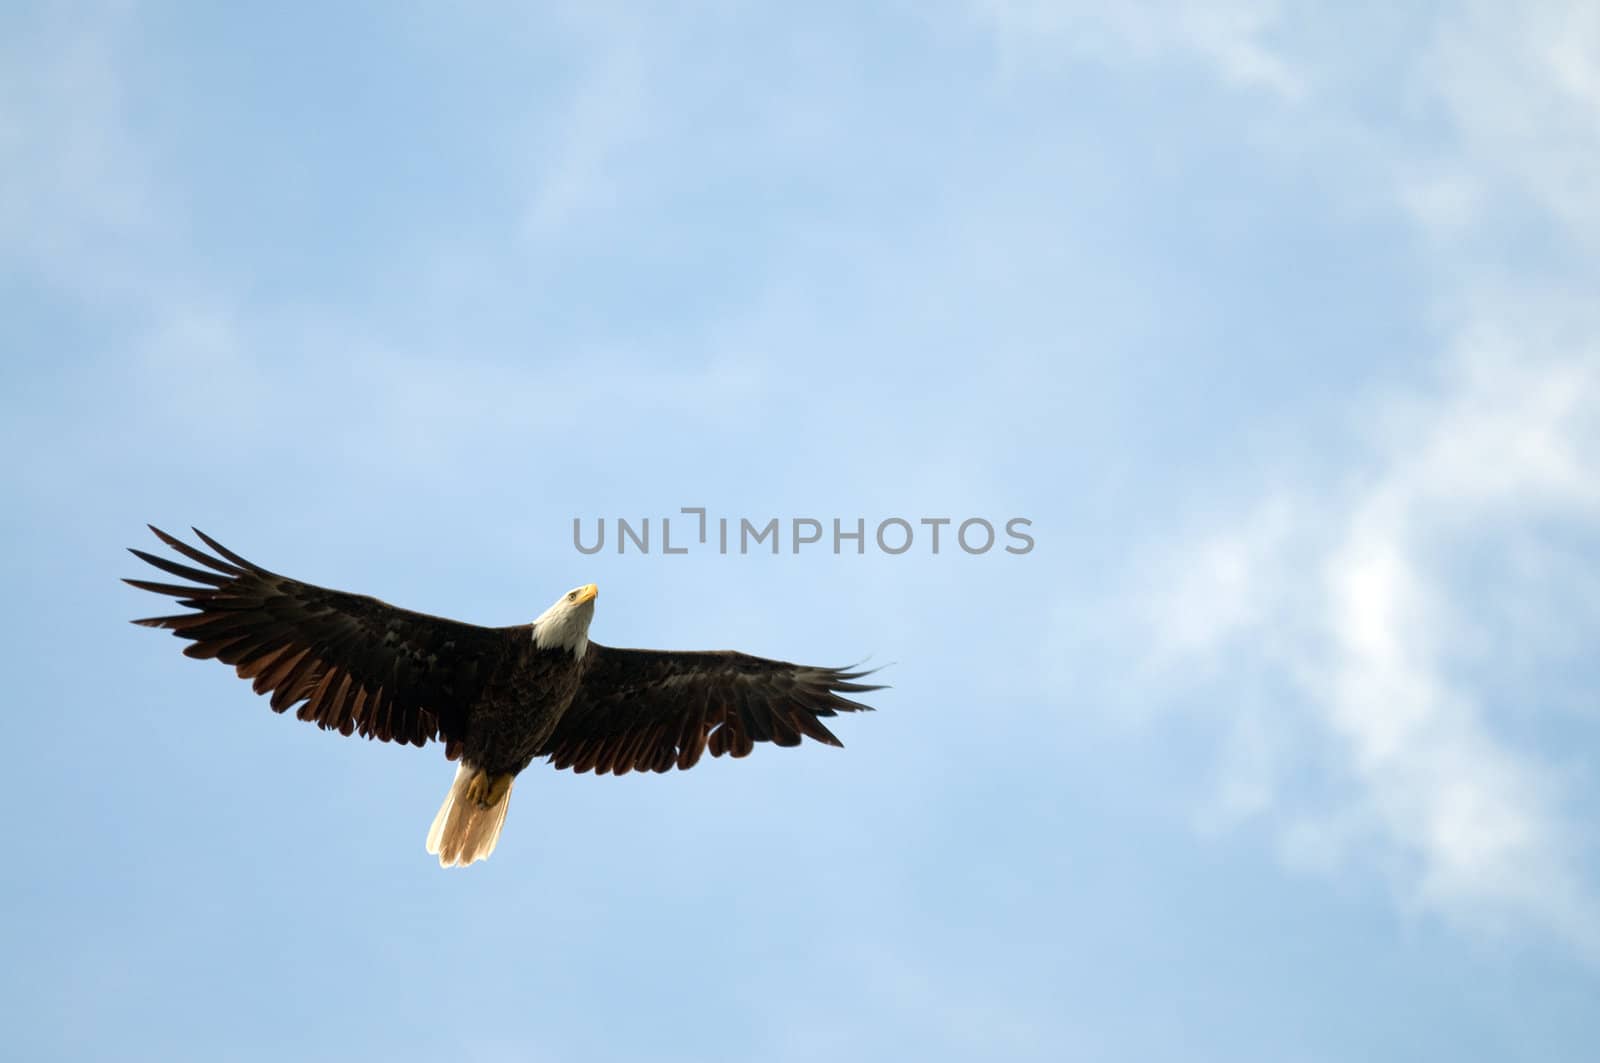 Bald eagle soaring with copy space in the blue sky area